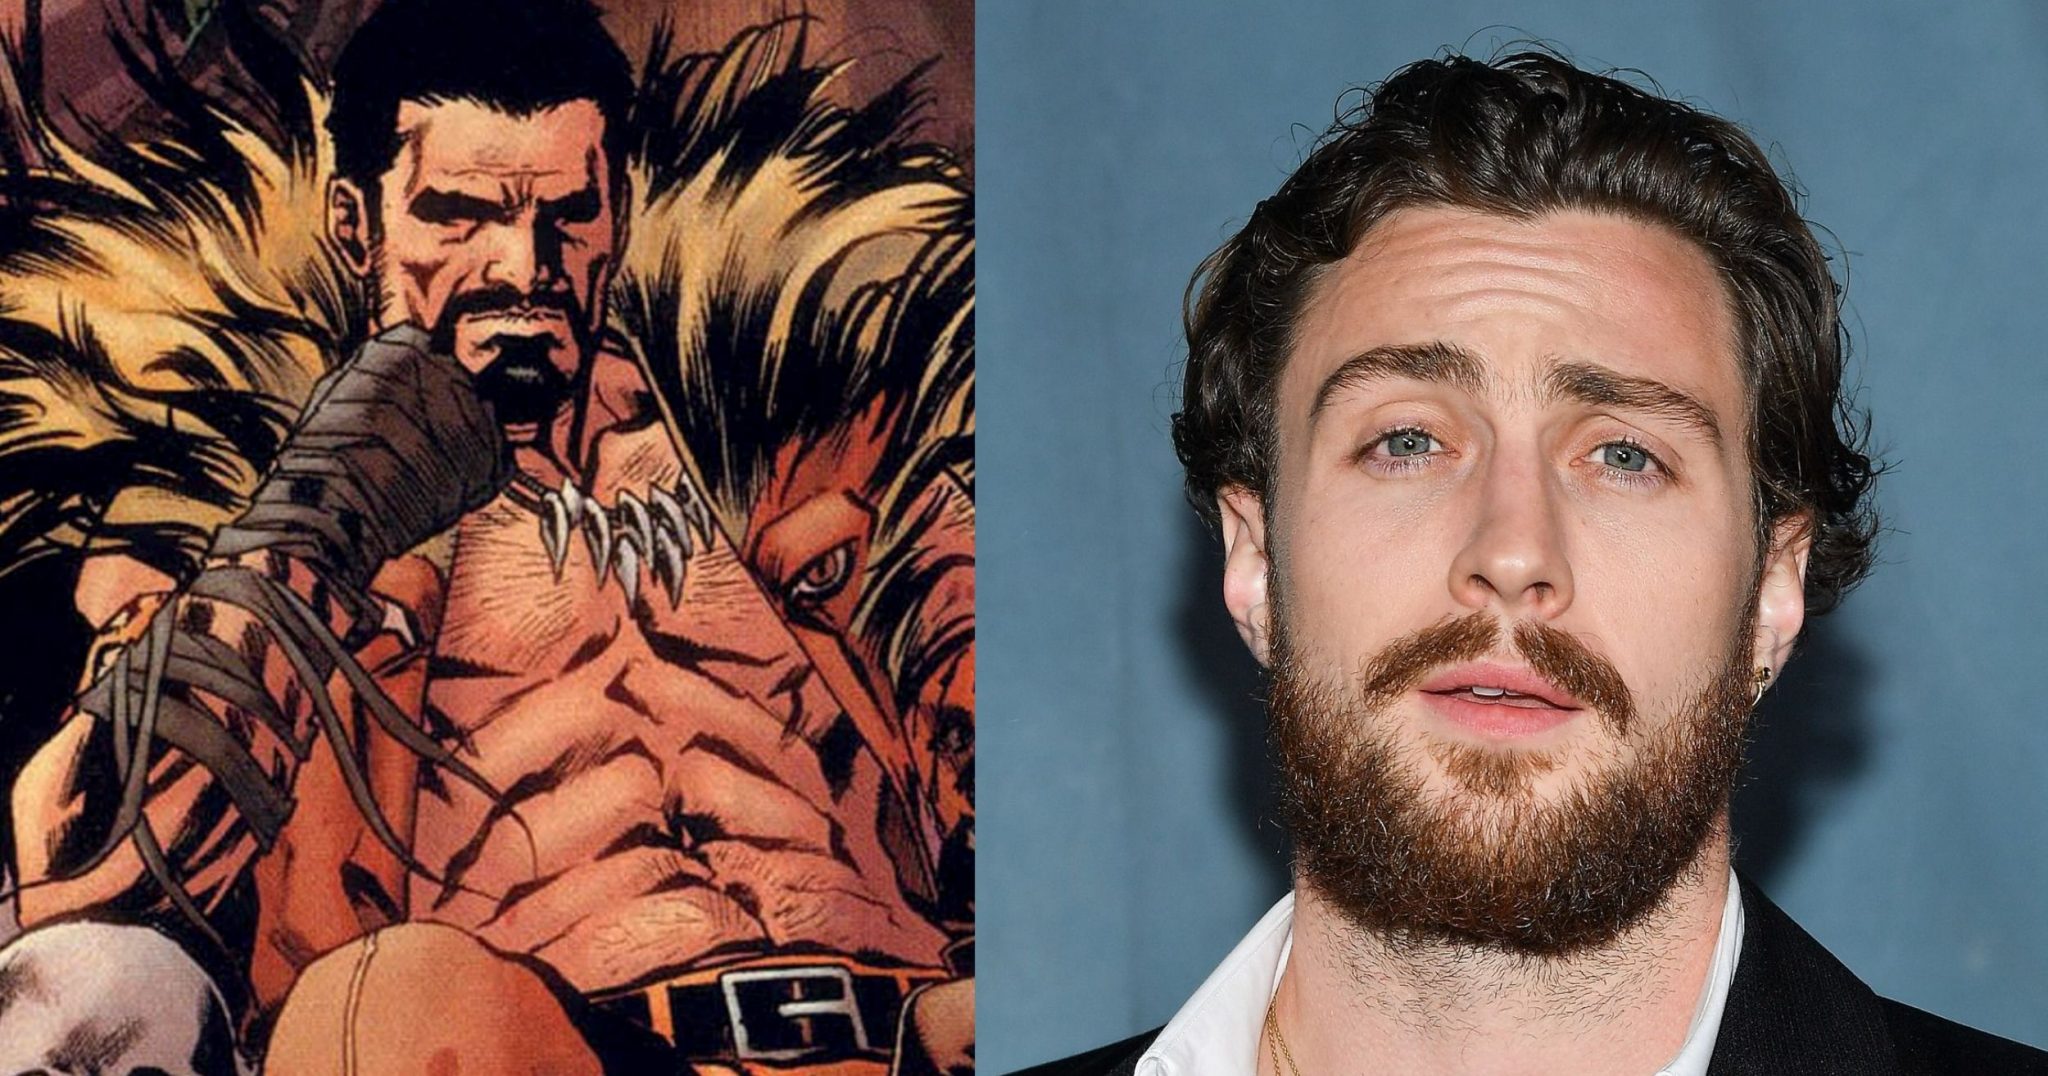 Kraven the Hunter has been casted!